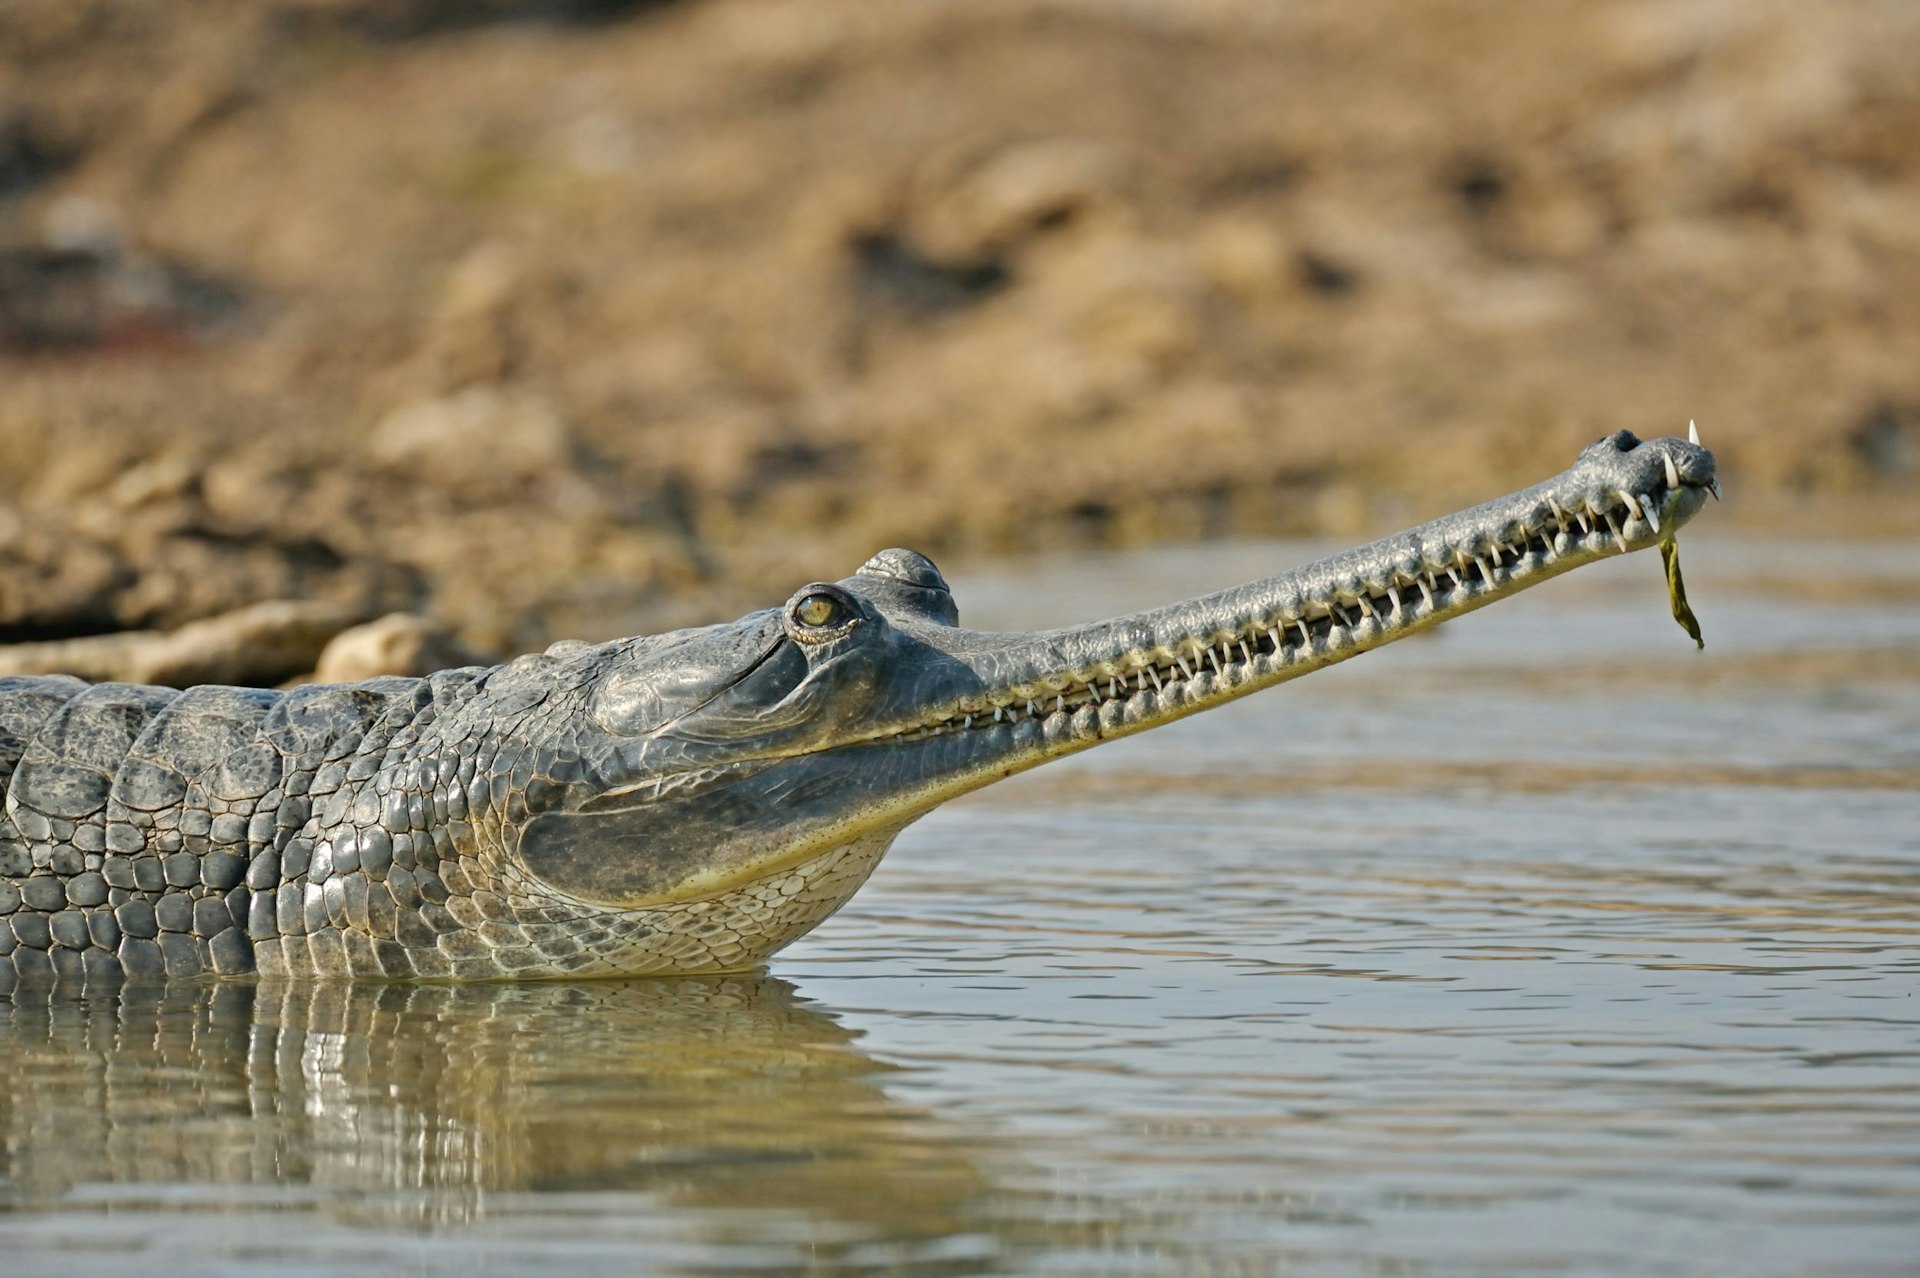 A gharial basks on the banks of the Chambal river © Arsgera / Getty Images